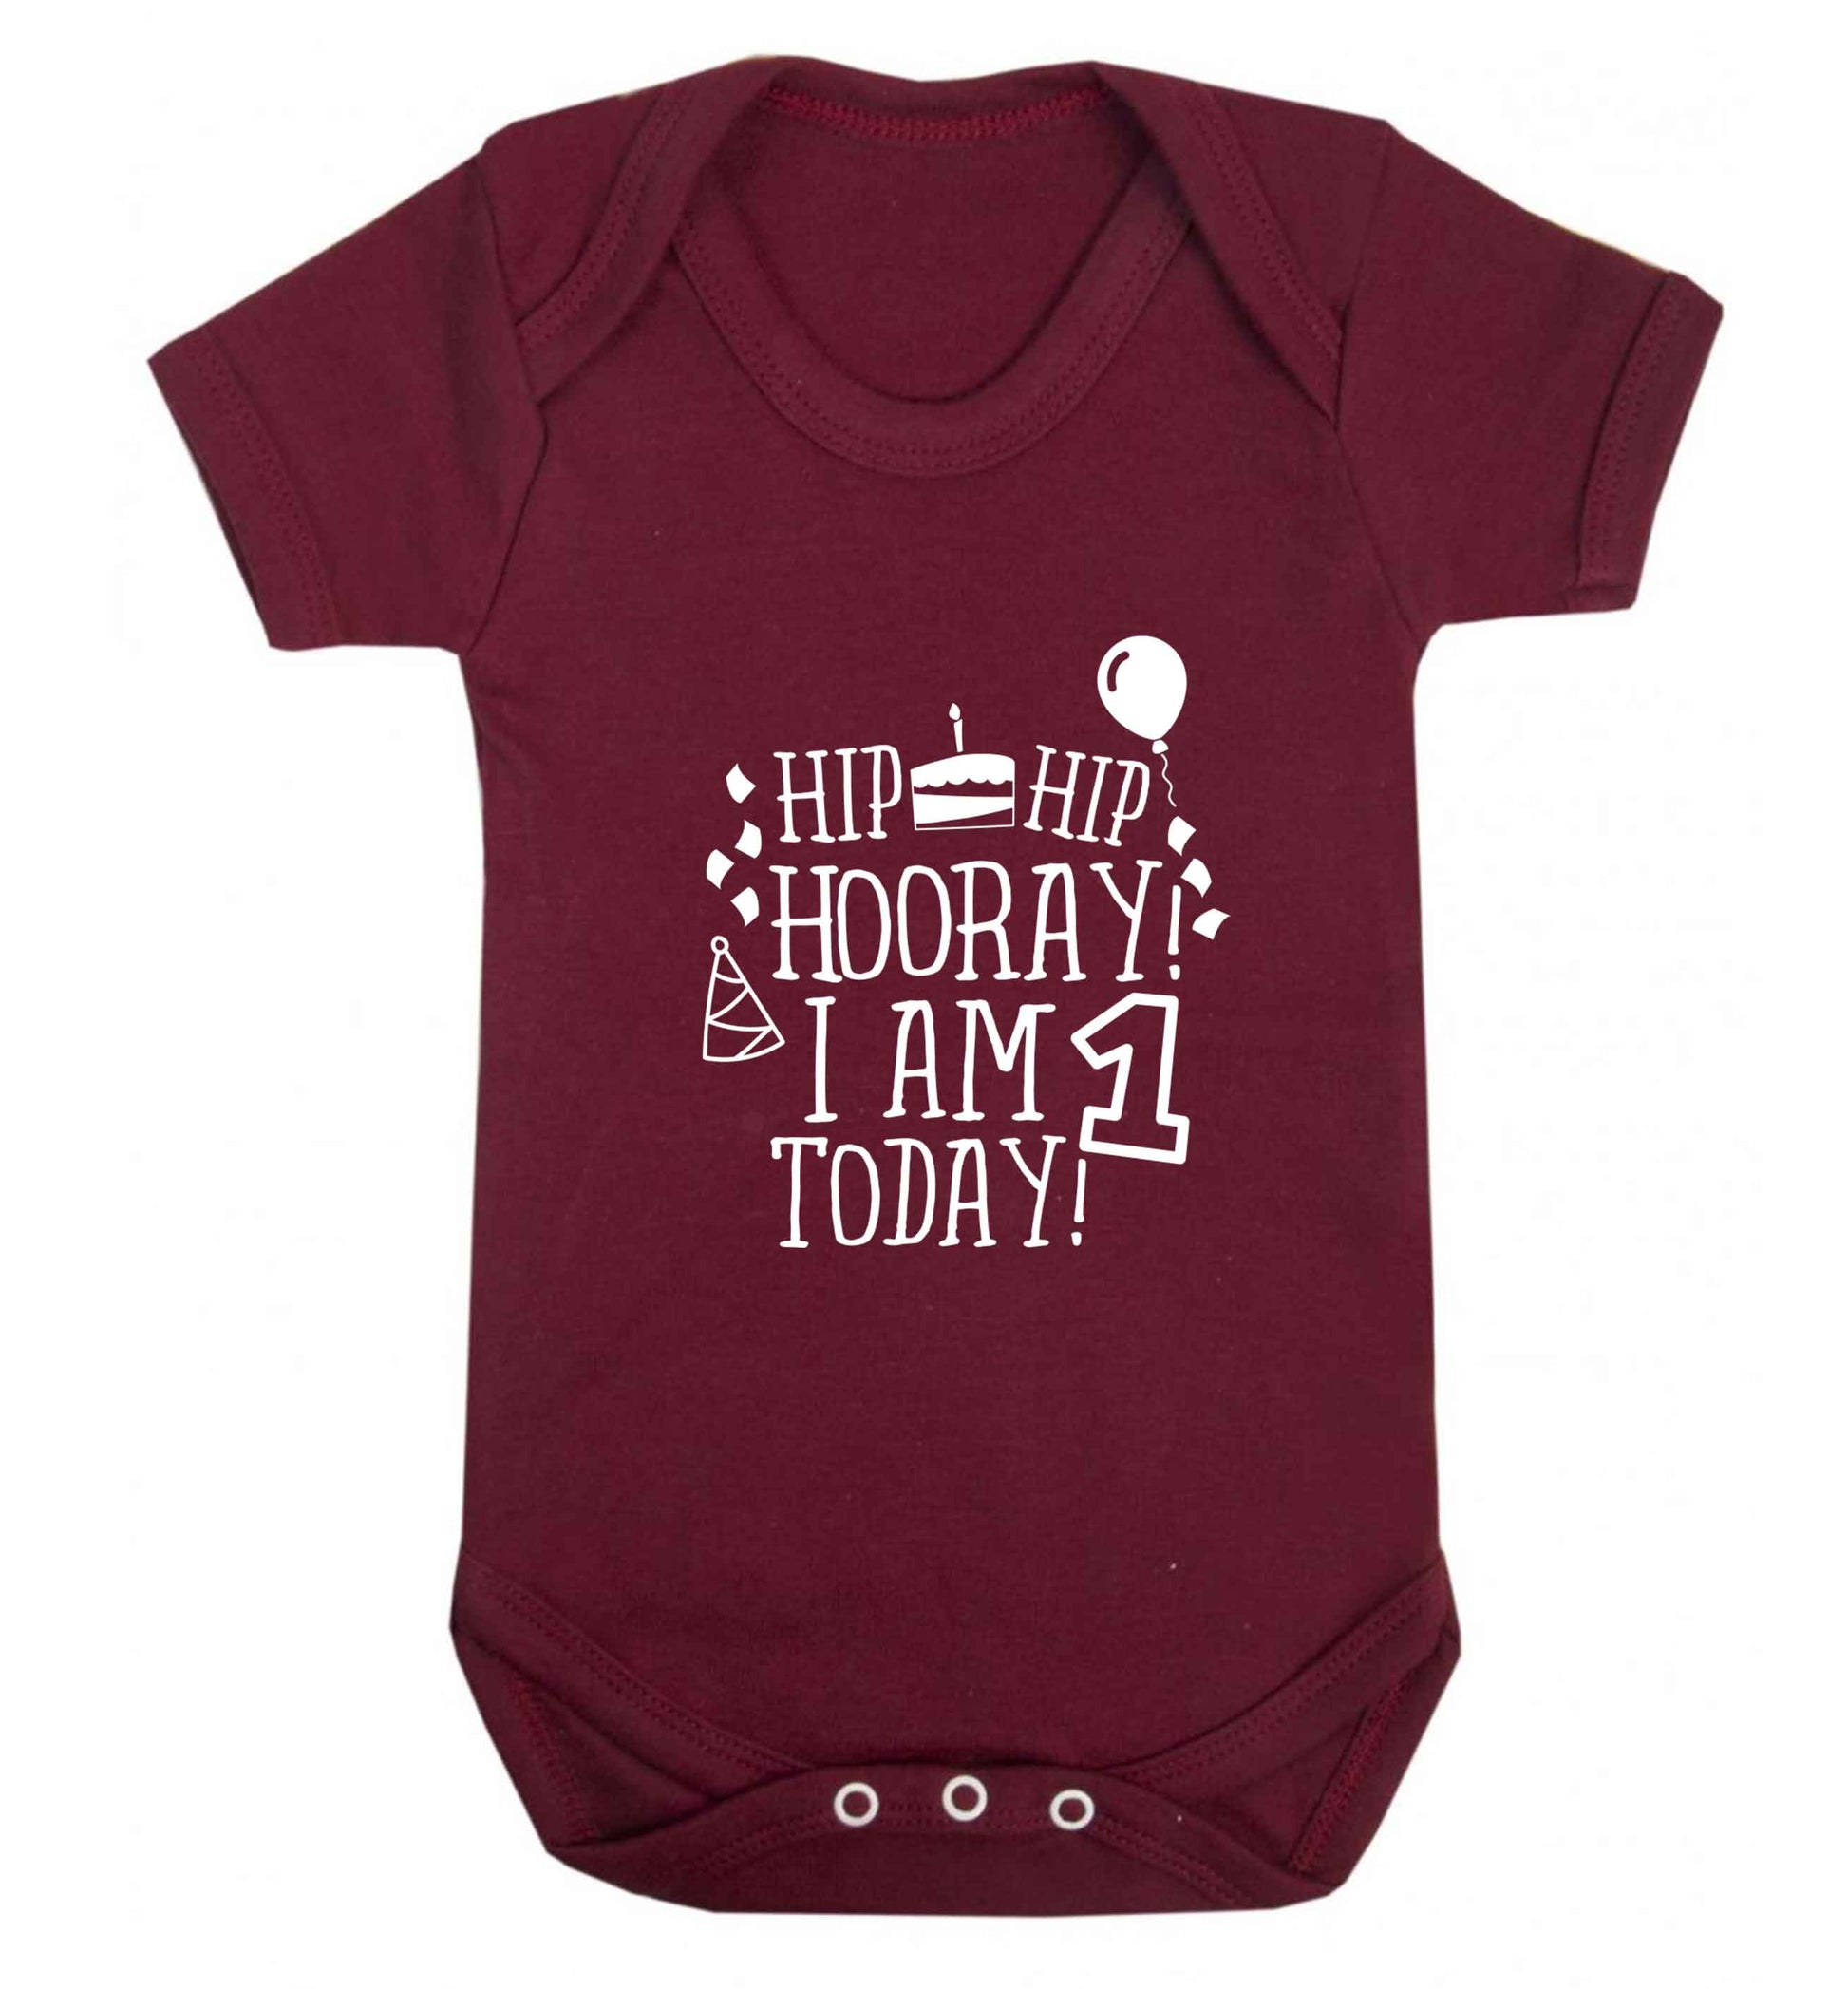 I am One Today baby vest maroon 18-24 months